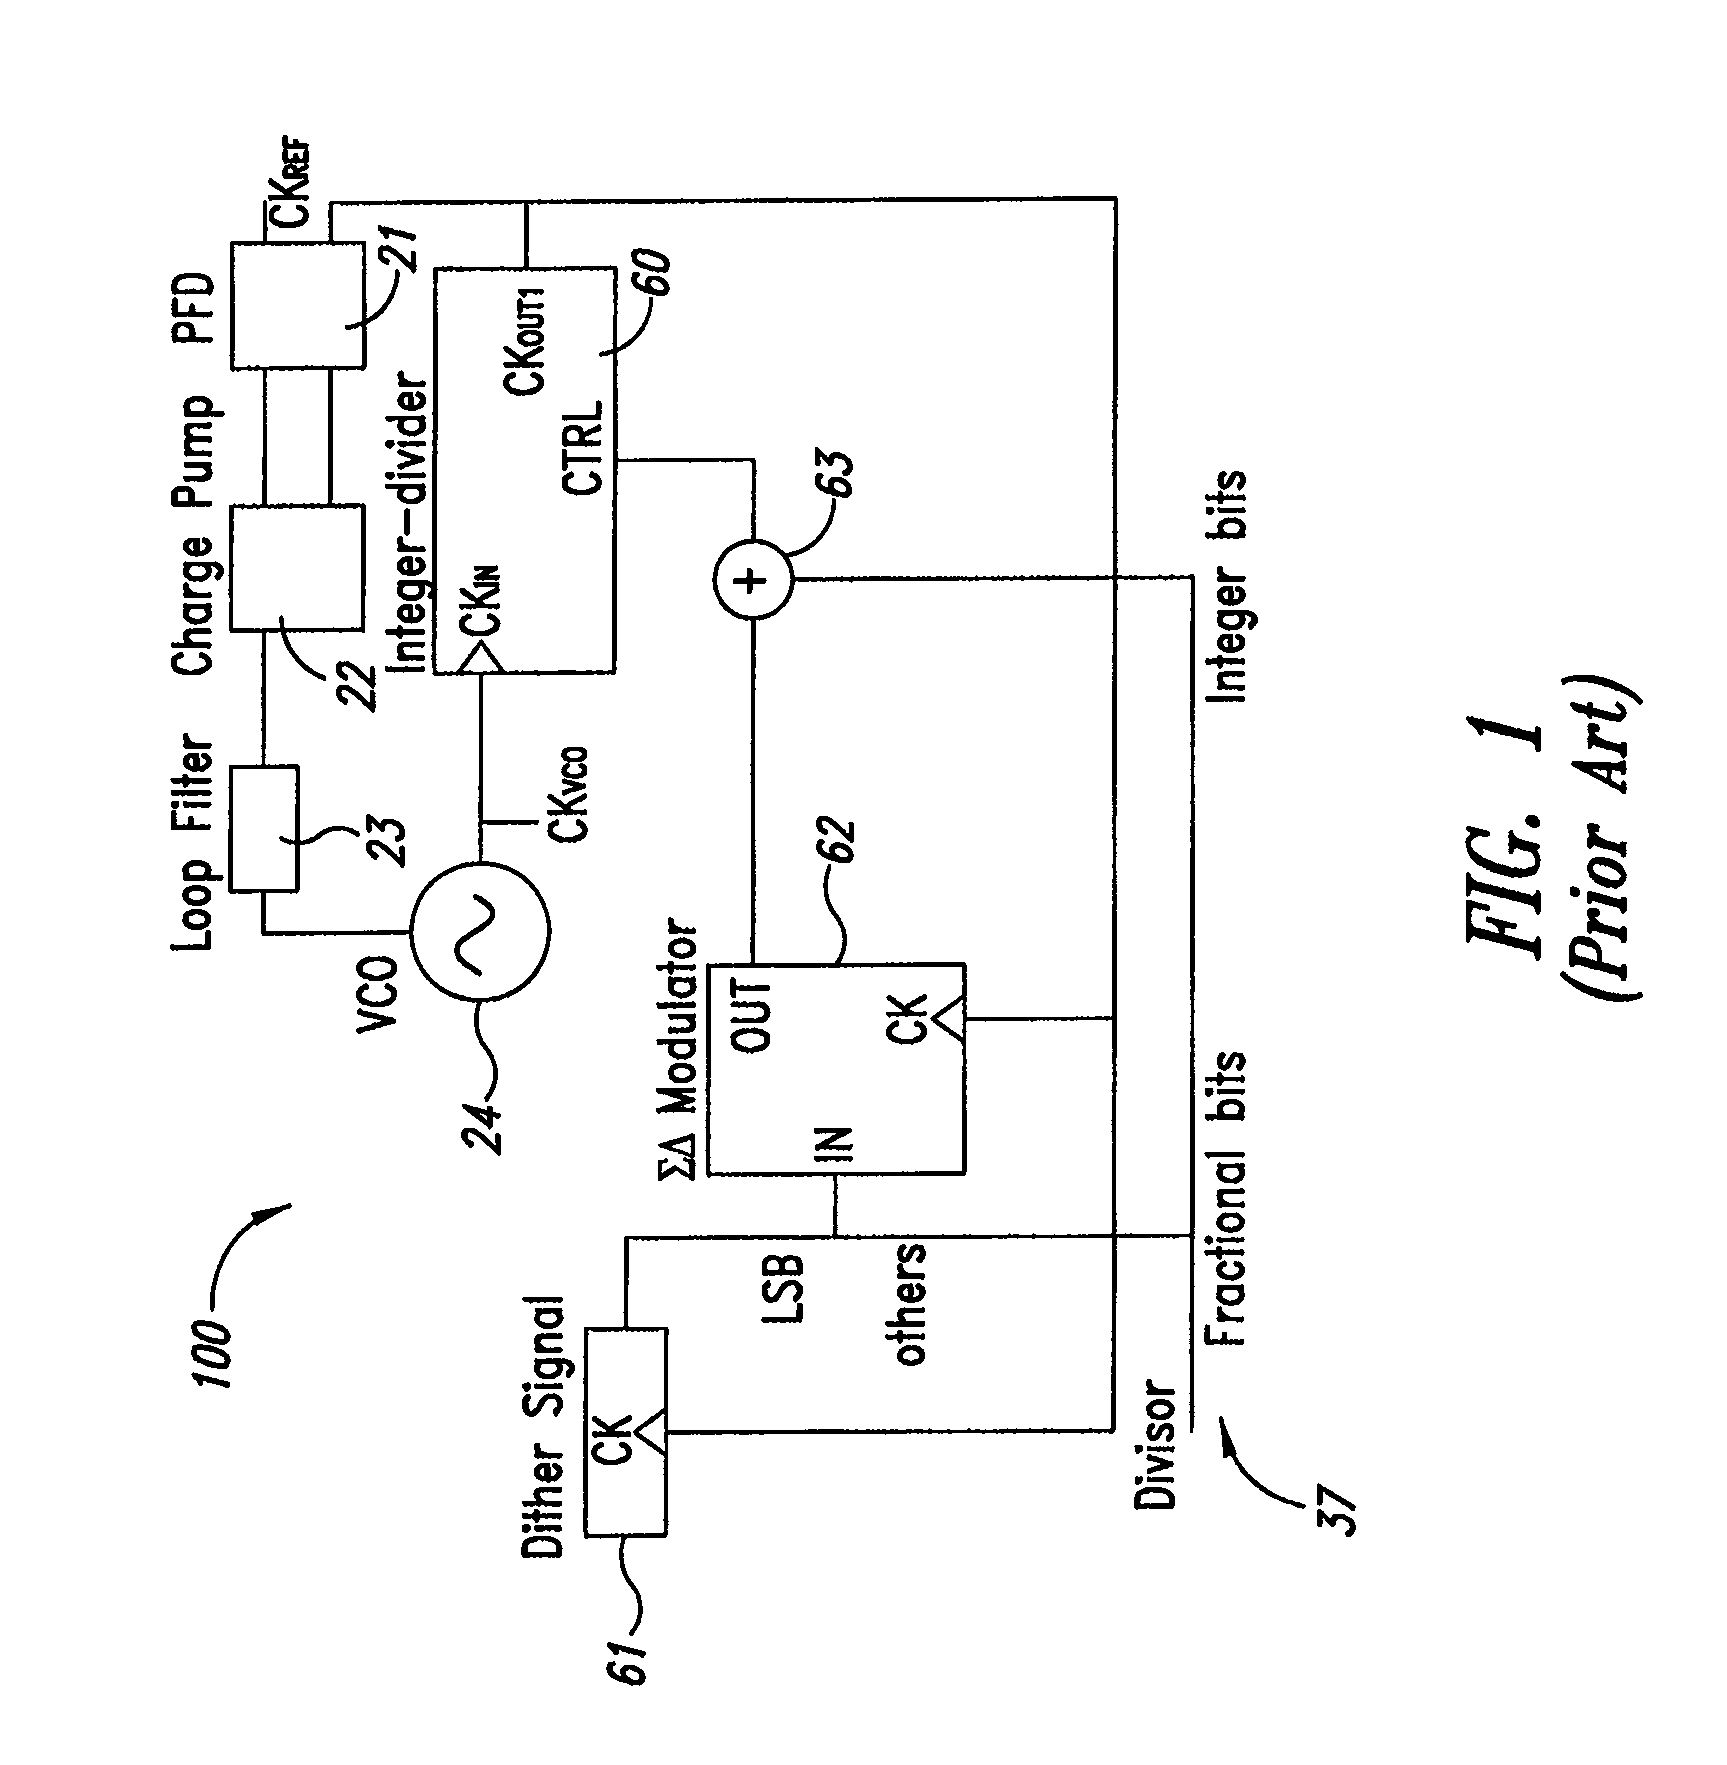 Frequency synthesizer circuit comprising a phase locked loop